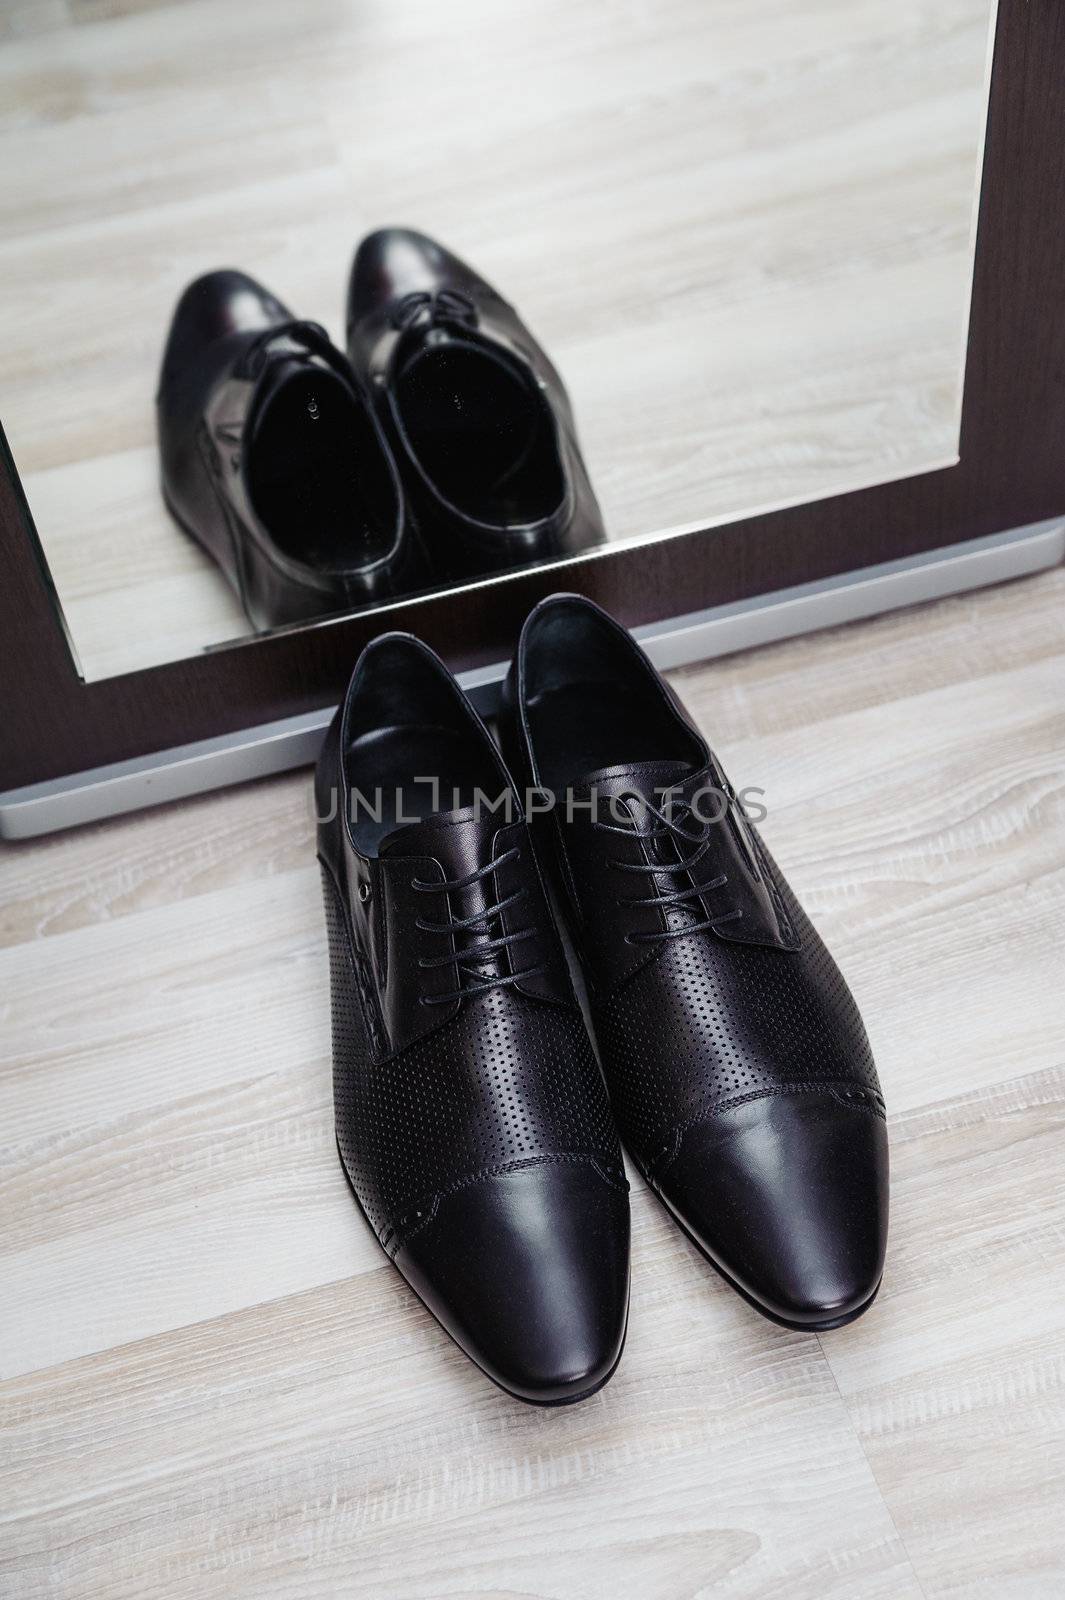 new stylish man shoe with mirror reflection by docer2000